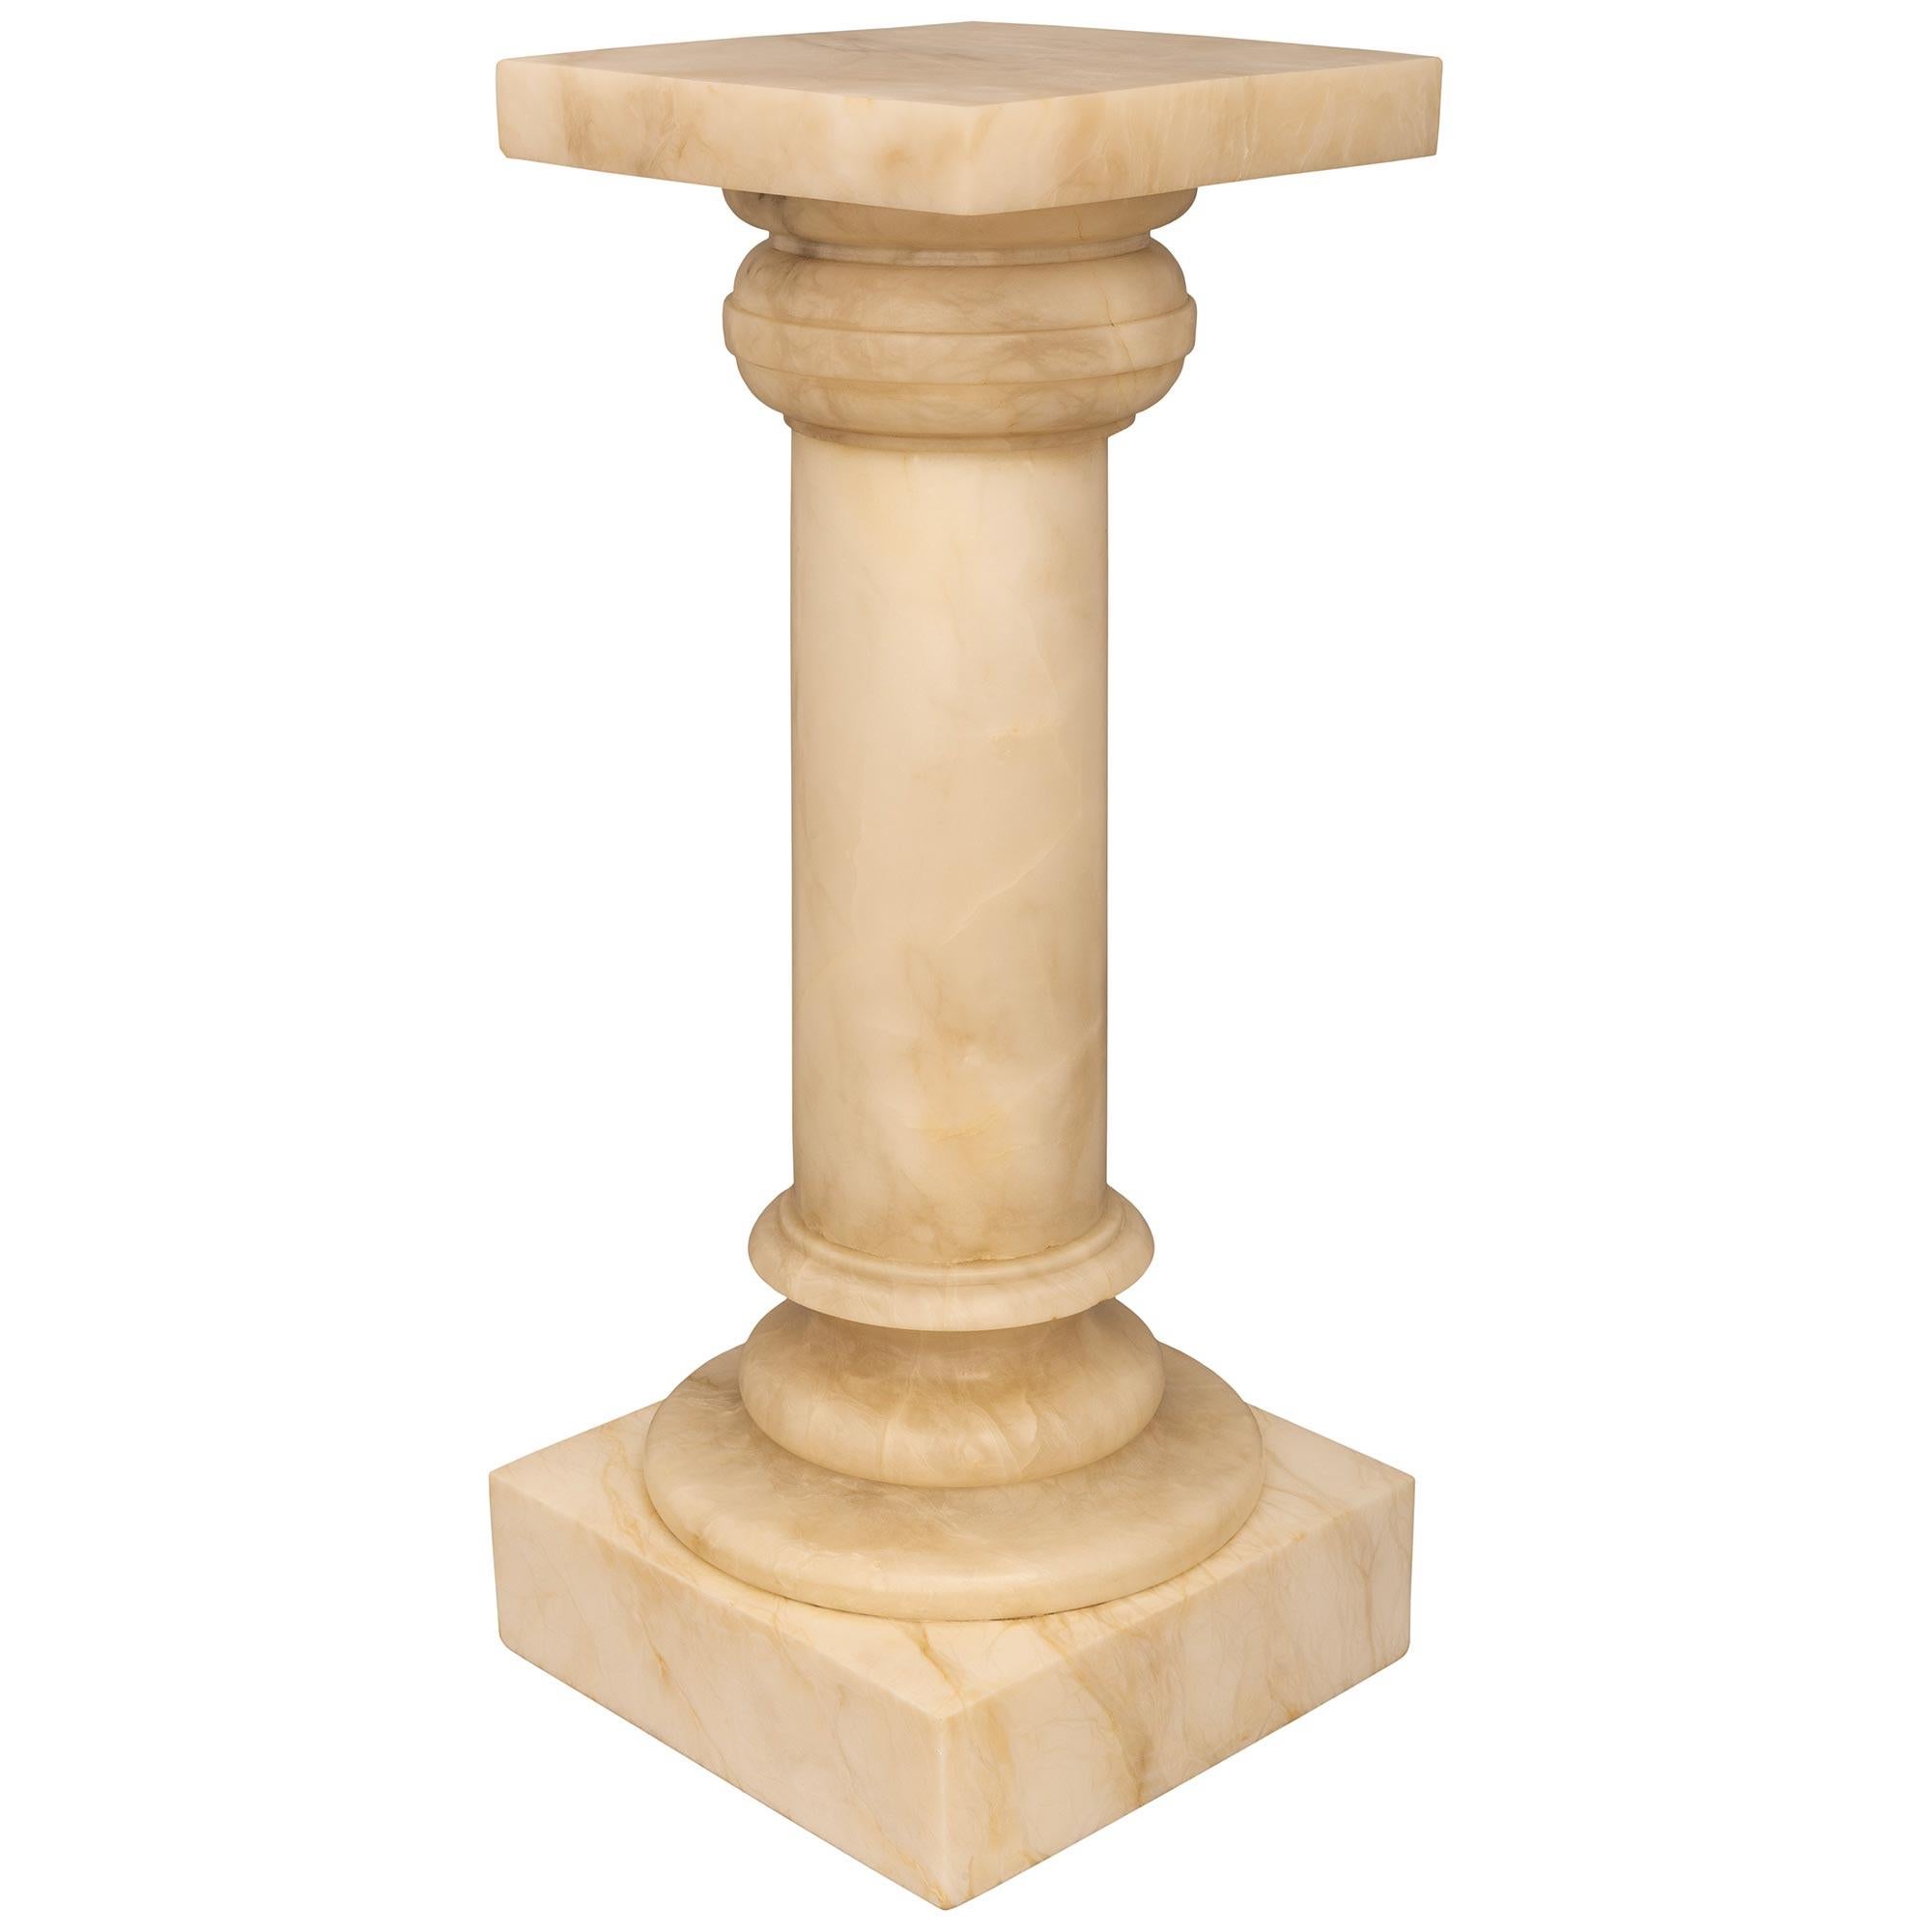 Italian 19th Century Cream Colored Alabaster Pedestal In Good Condition For Sale In West Palm Beach, FL